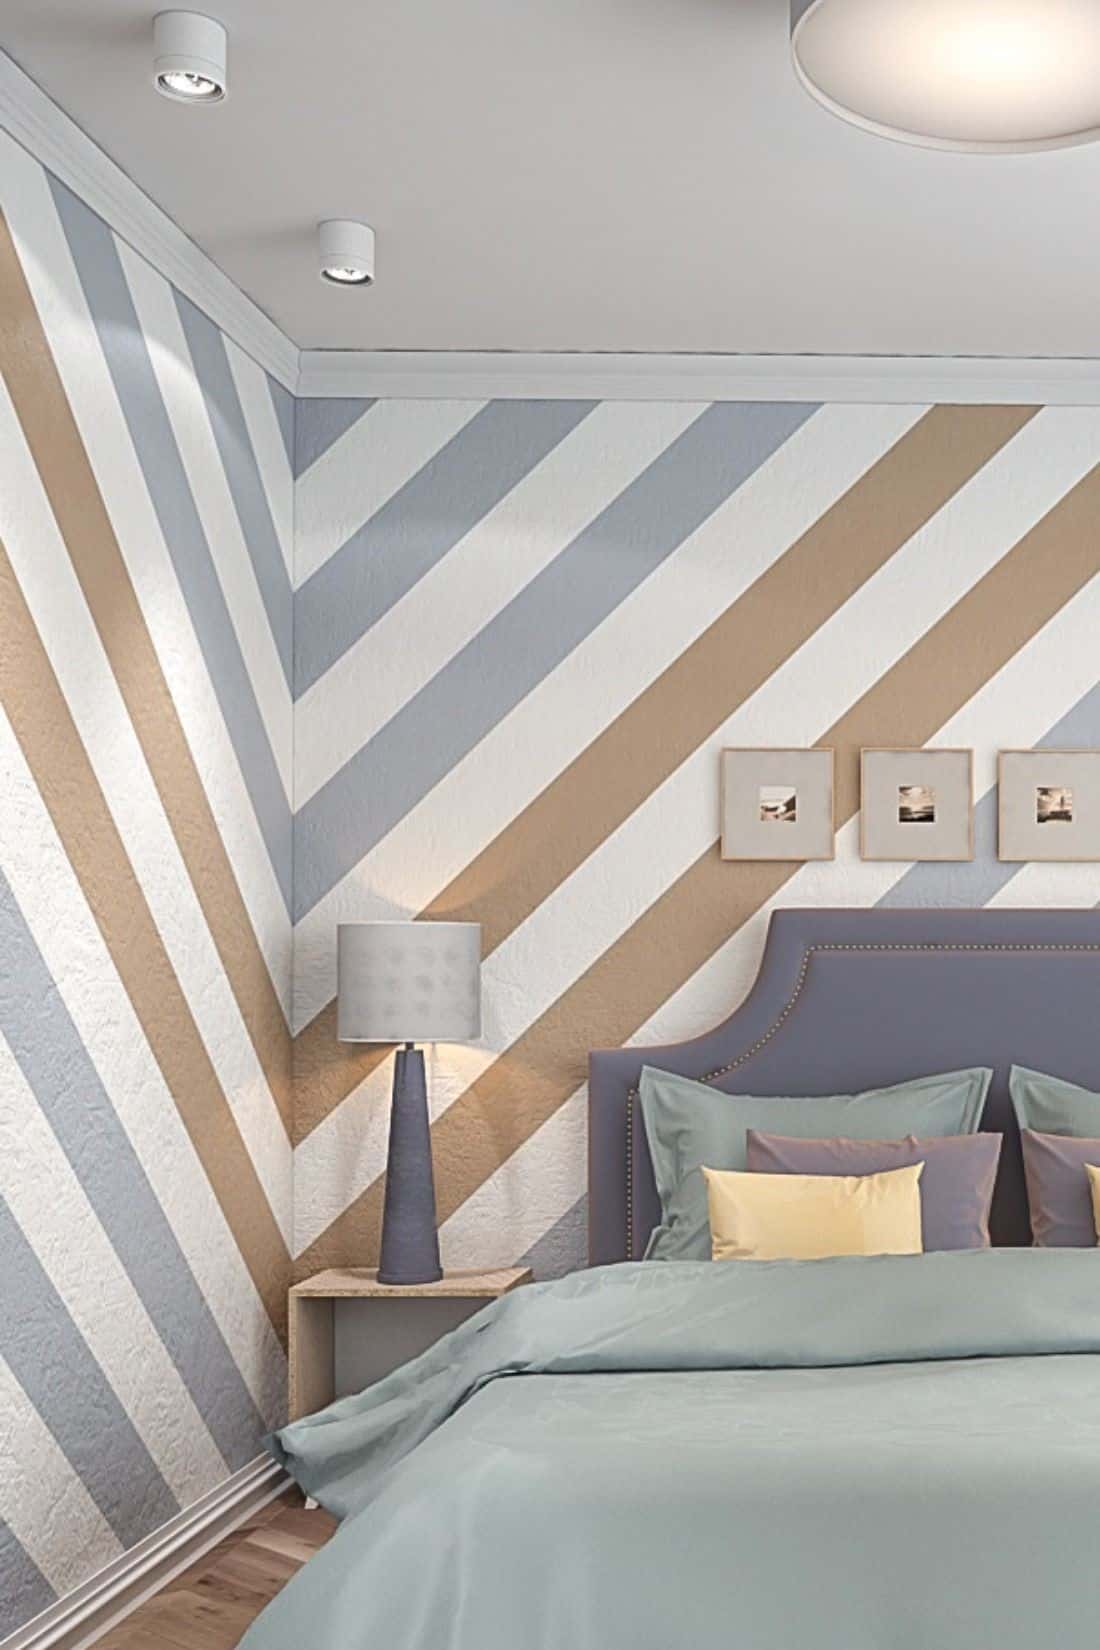 A bedroom wall with stripe wall paint design idea along with a bed and a lamp